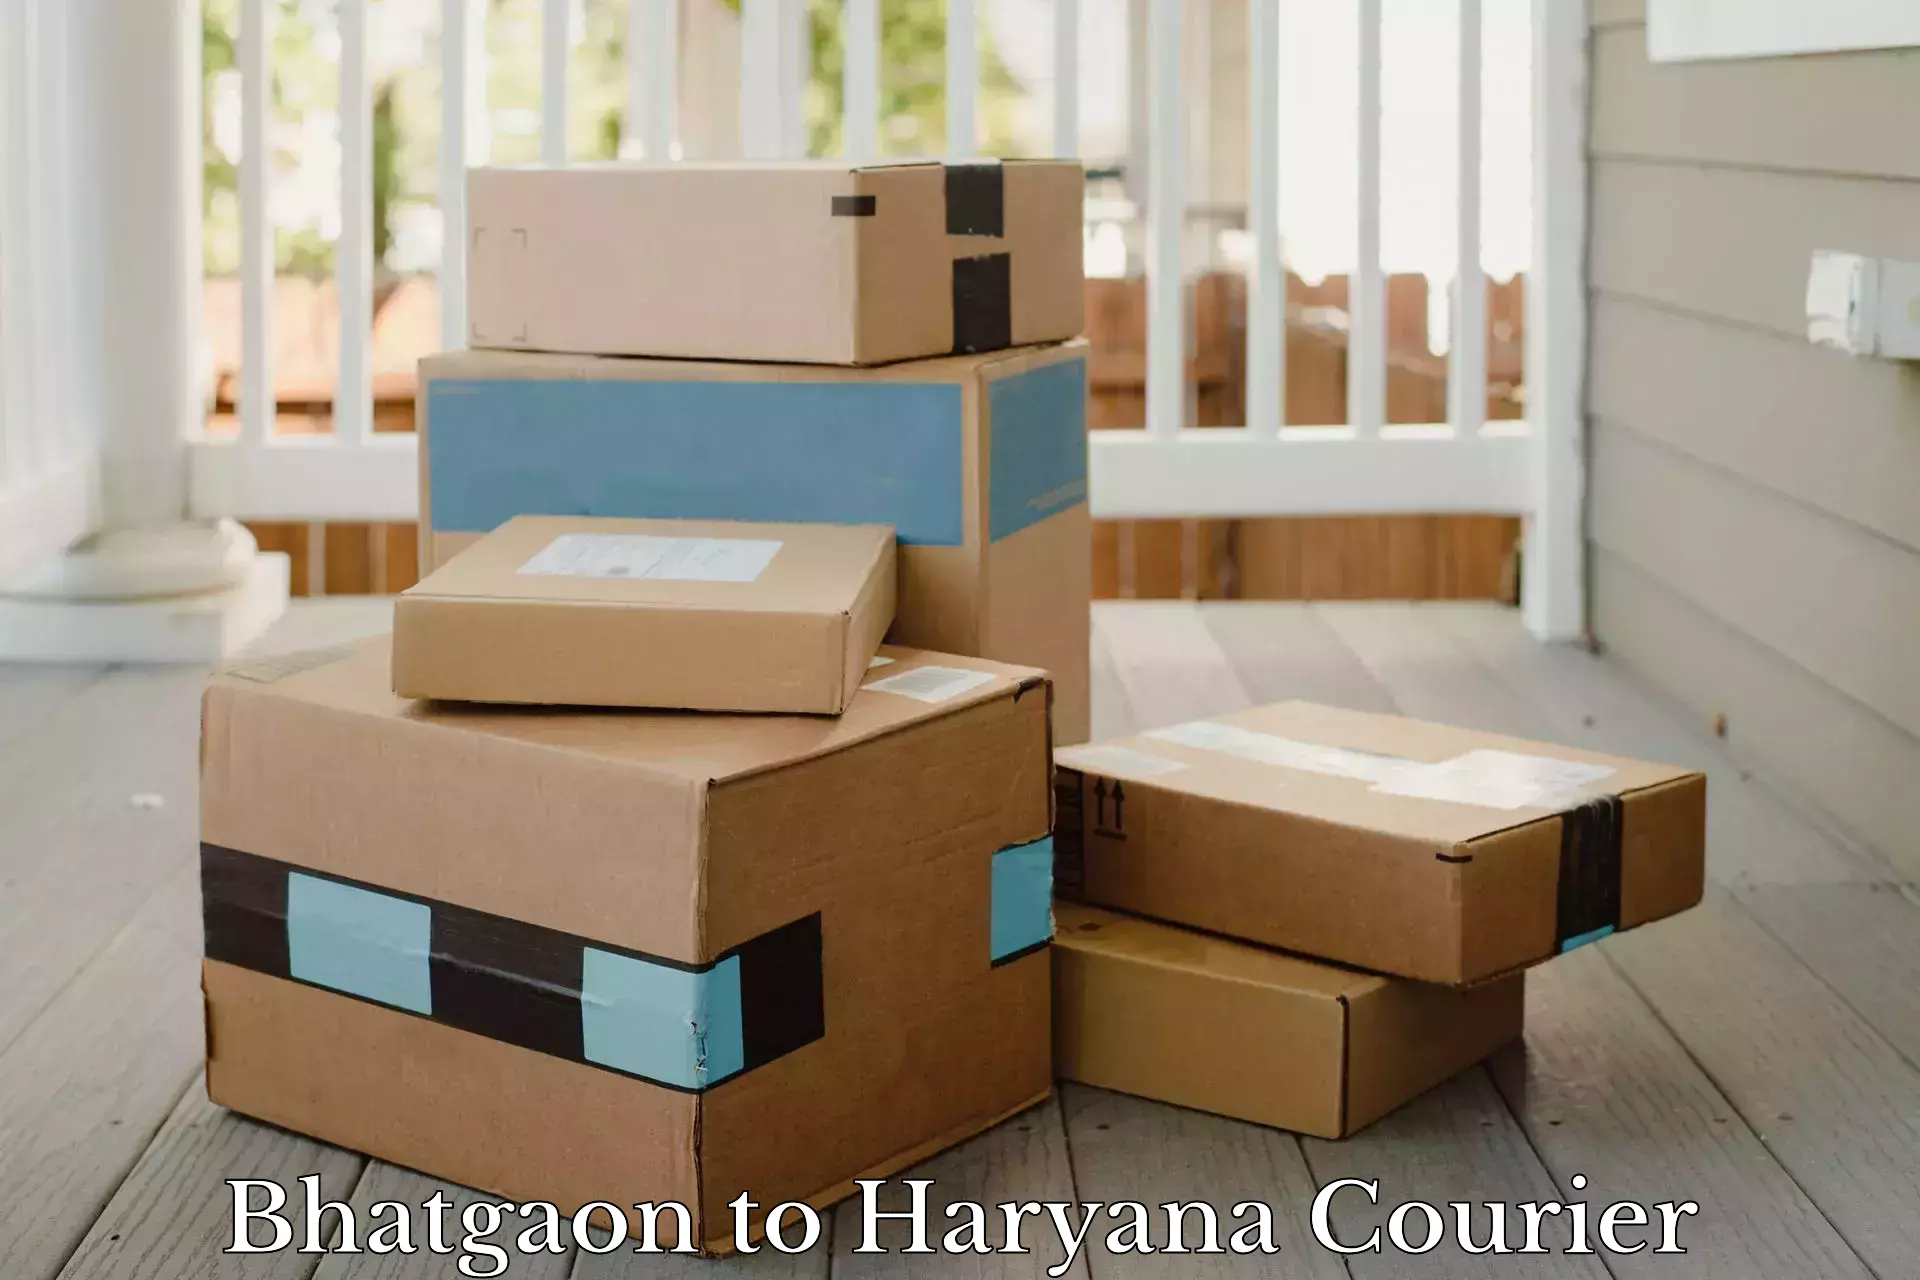 Easy access courier services Bhatgaon to Gurugram